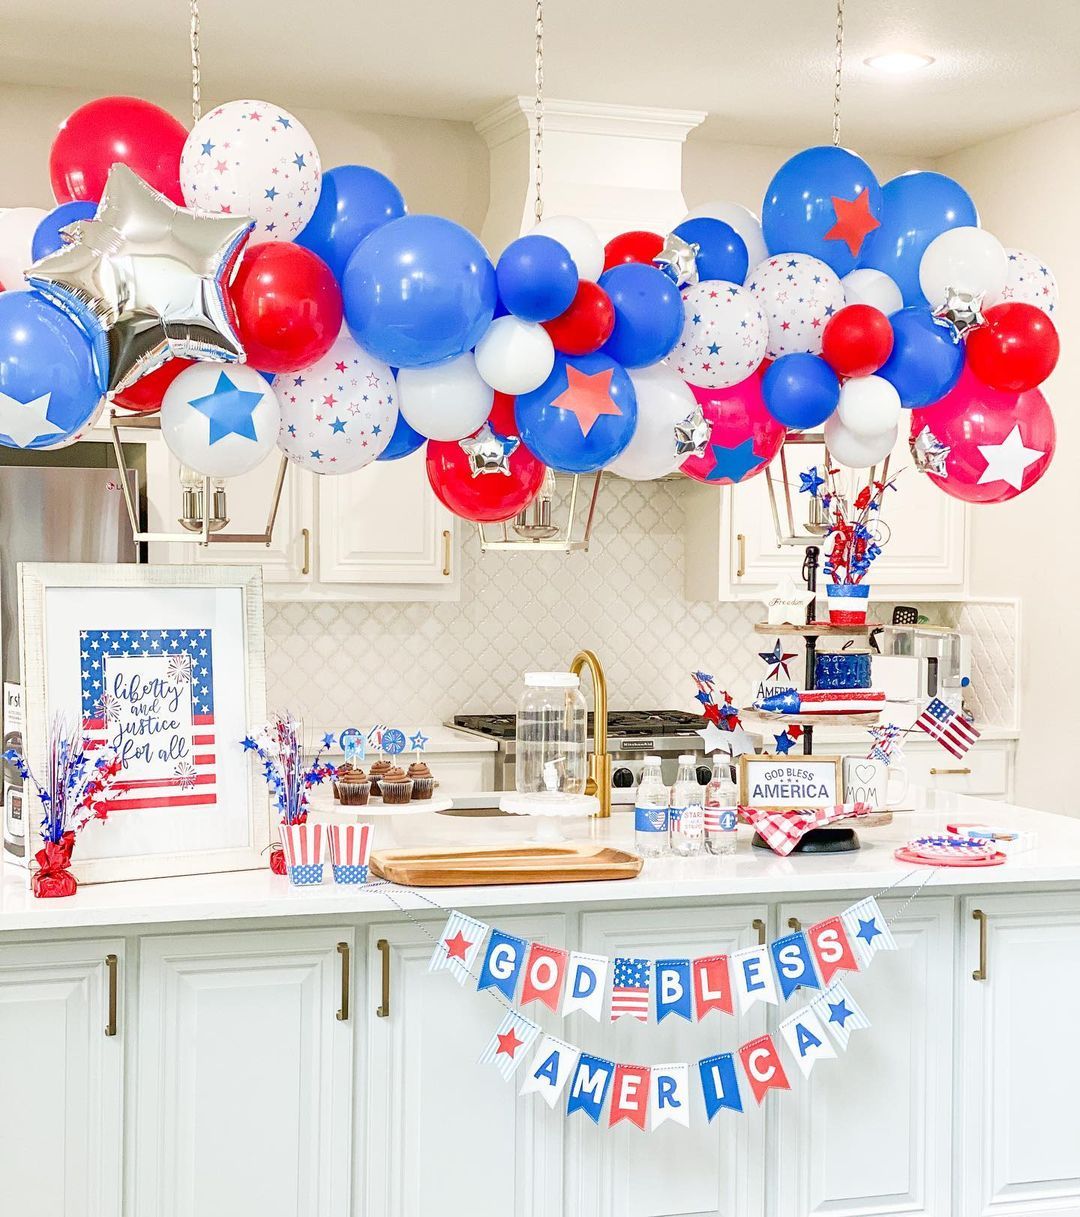 4th of July Home Decor Balloons abvoe the kitchen island via @hadleydesigns